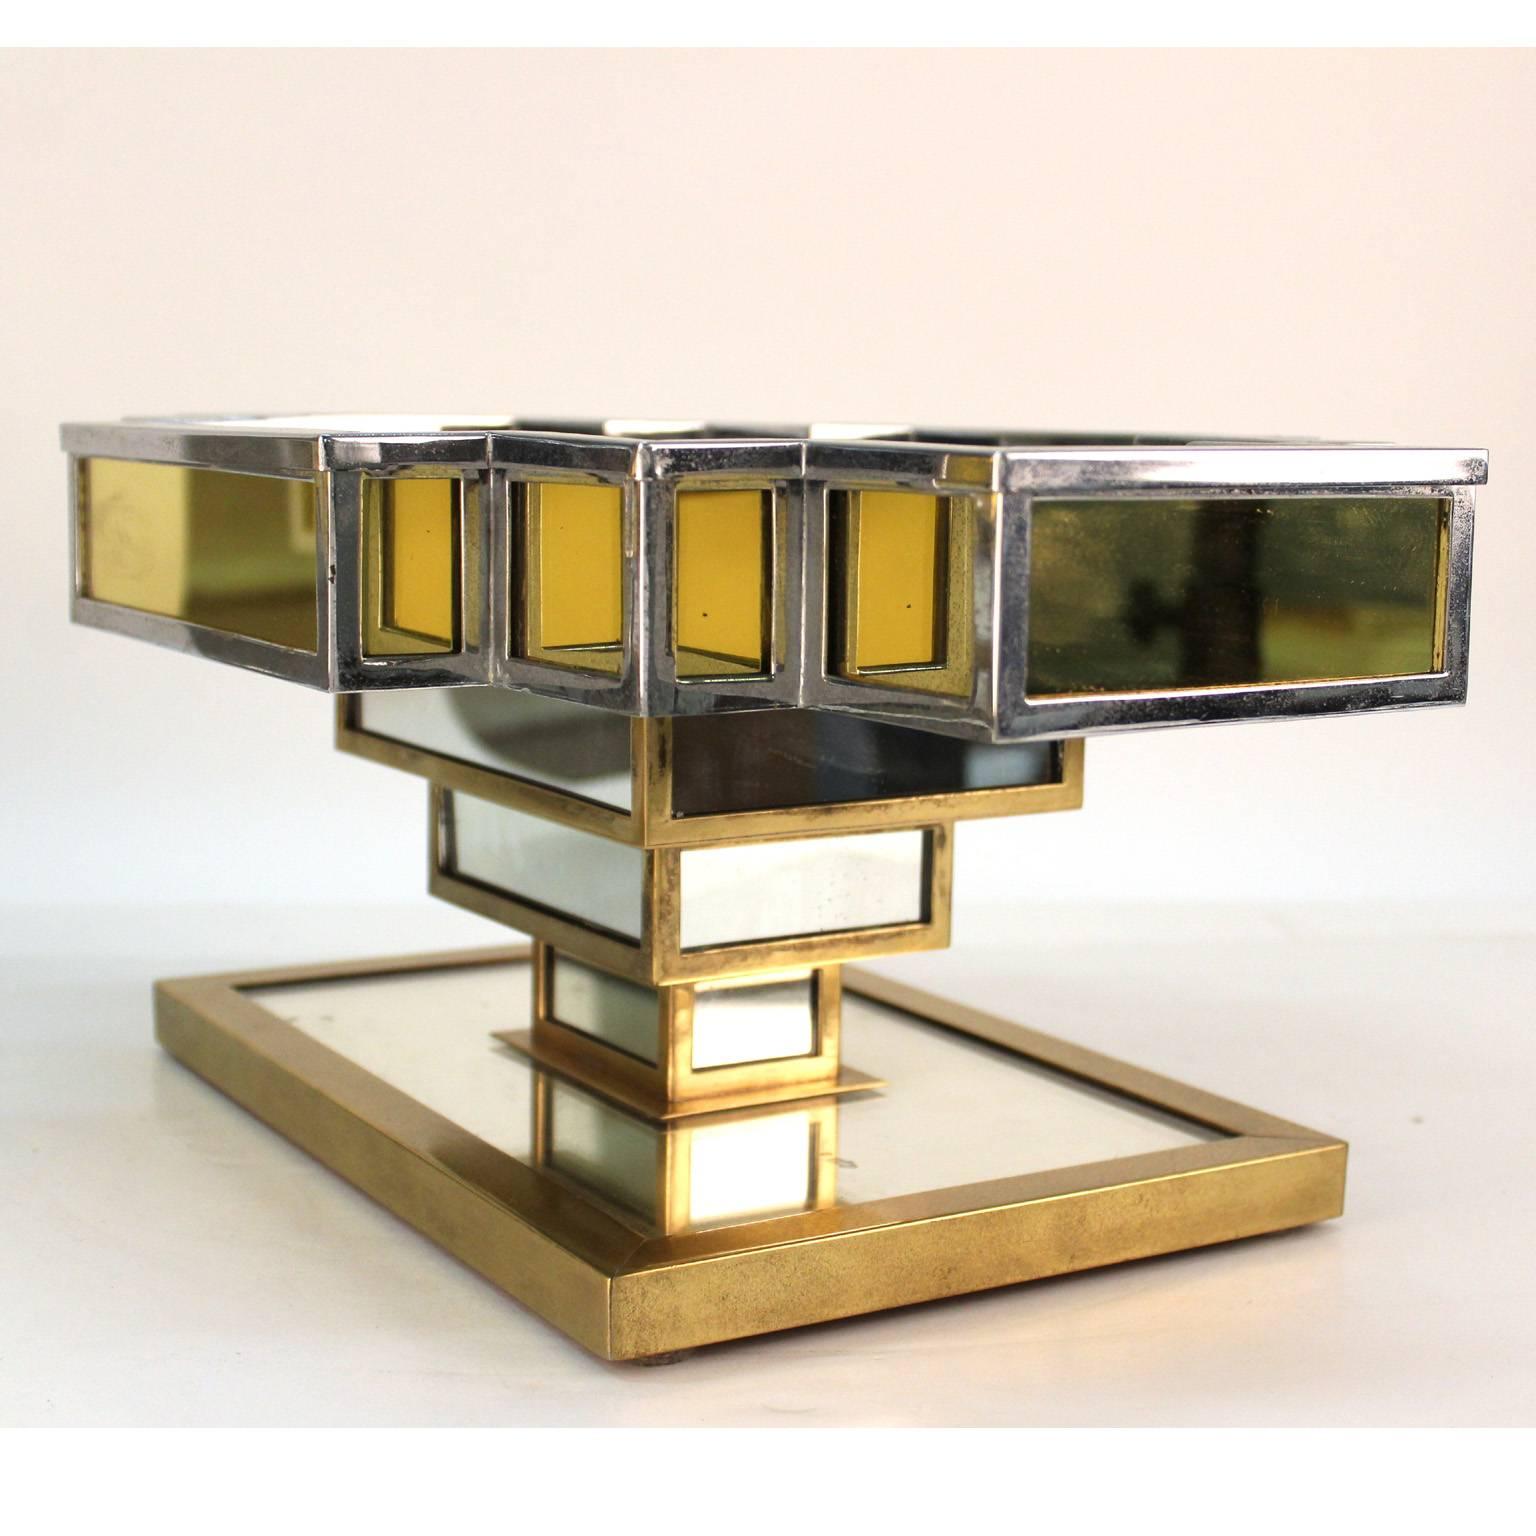 20th Century French Art Deco Mirrored Architectural Centrepieces For Sale